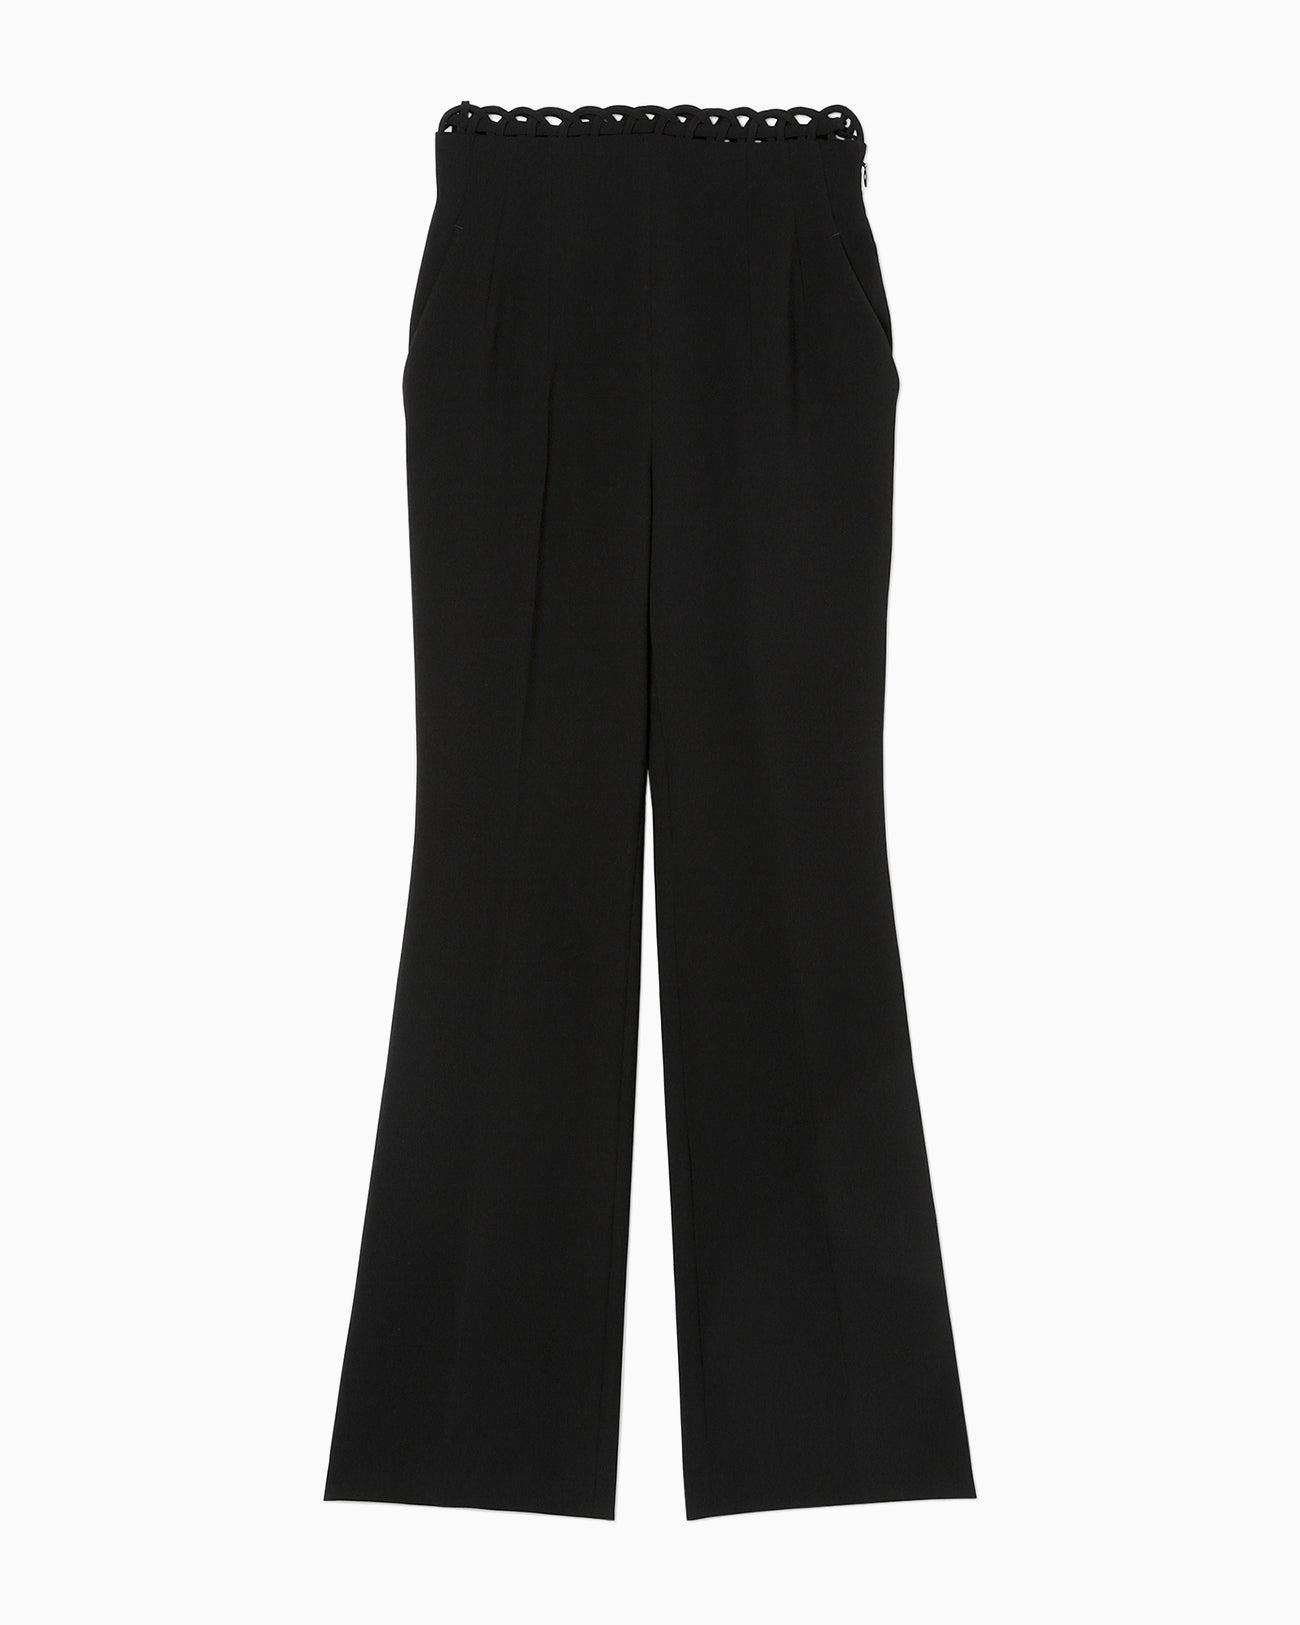 Stretched Triacetate Basket Pattern Trousers - black